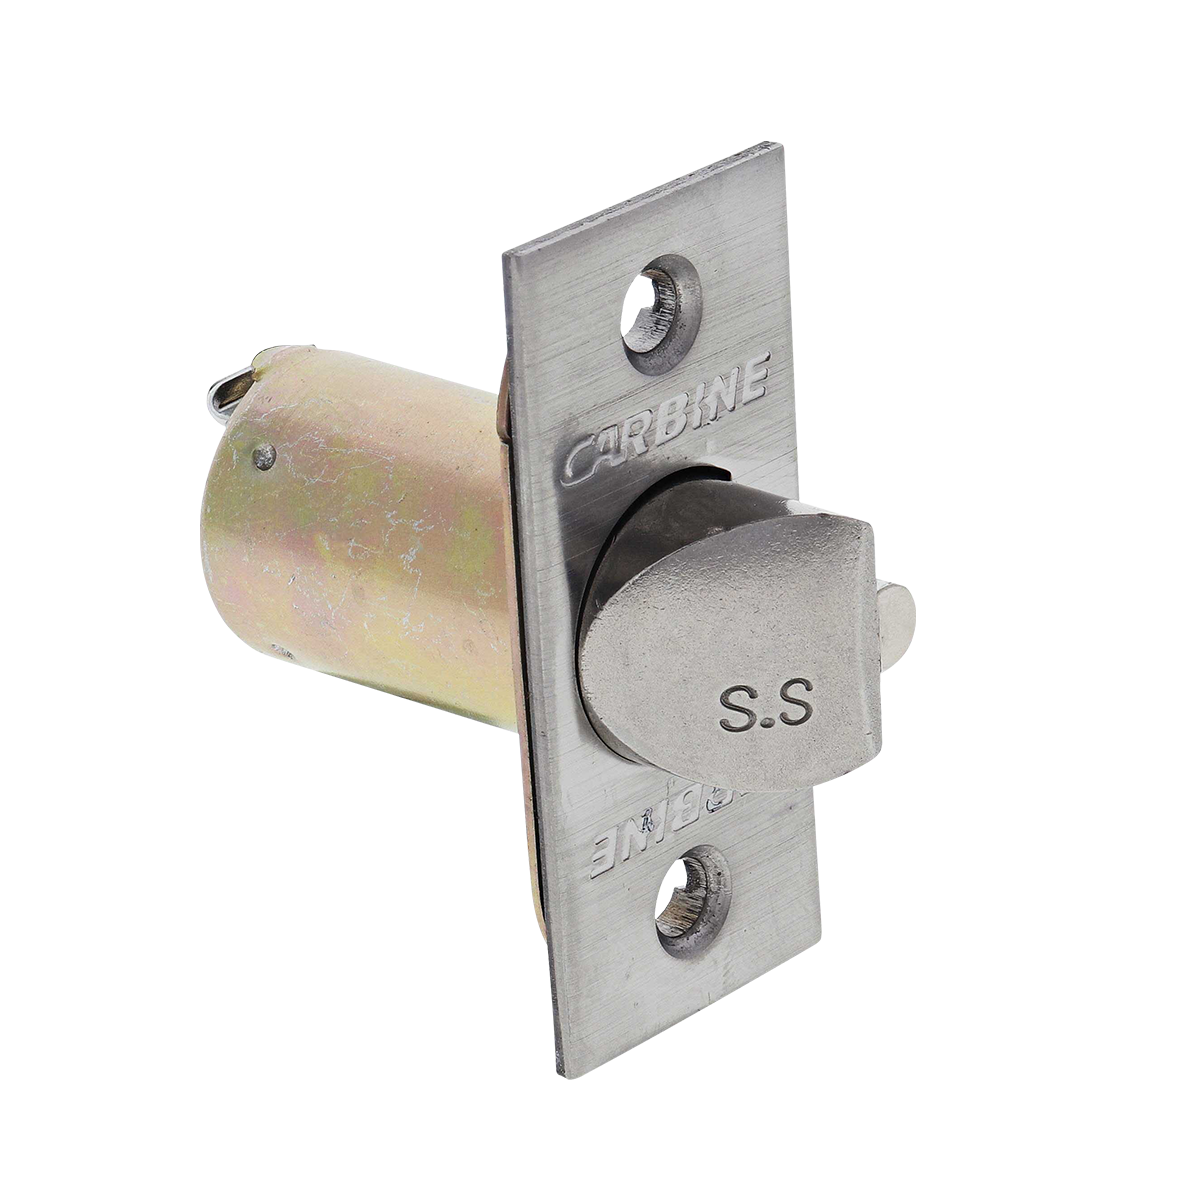 Carbine cylindrical 60mm deadlatch stainless steel - Premium Door Hardware from Carbine - Shop now at Firebox Australia